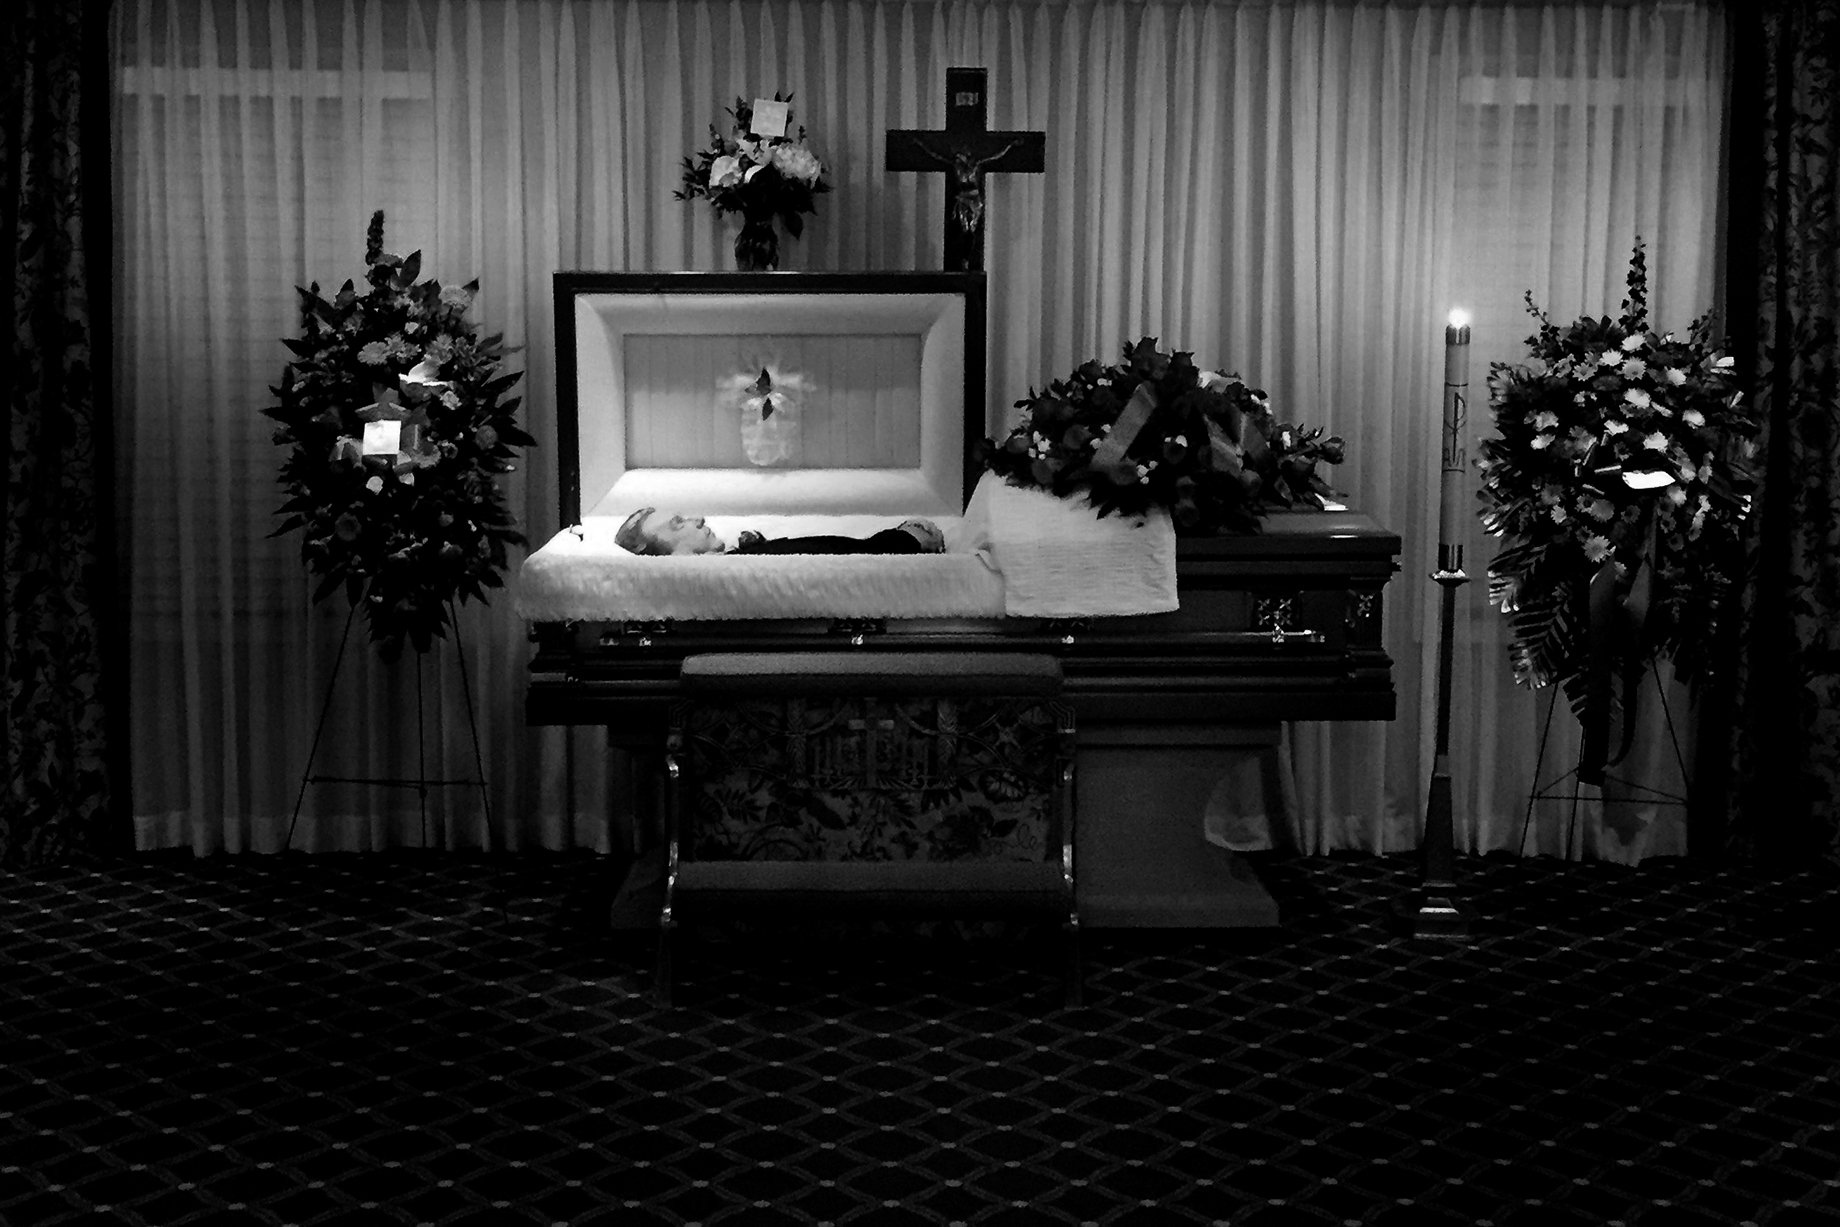 Photographer Sean Scheidt's grandfather in his casket in black and white